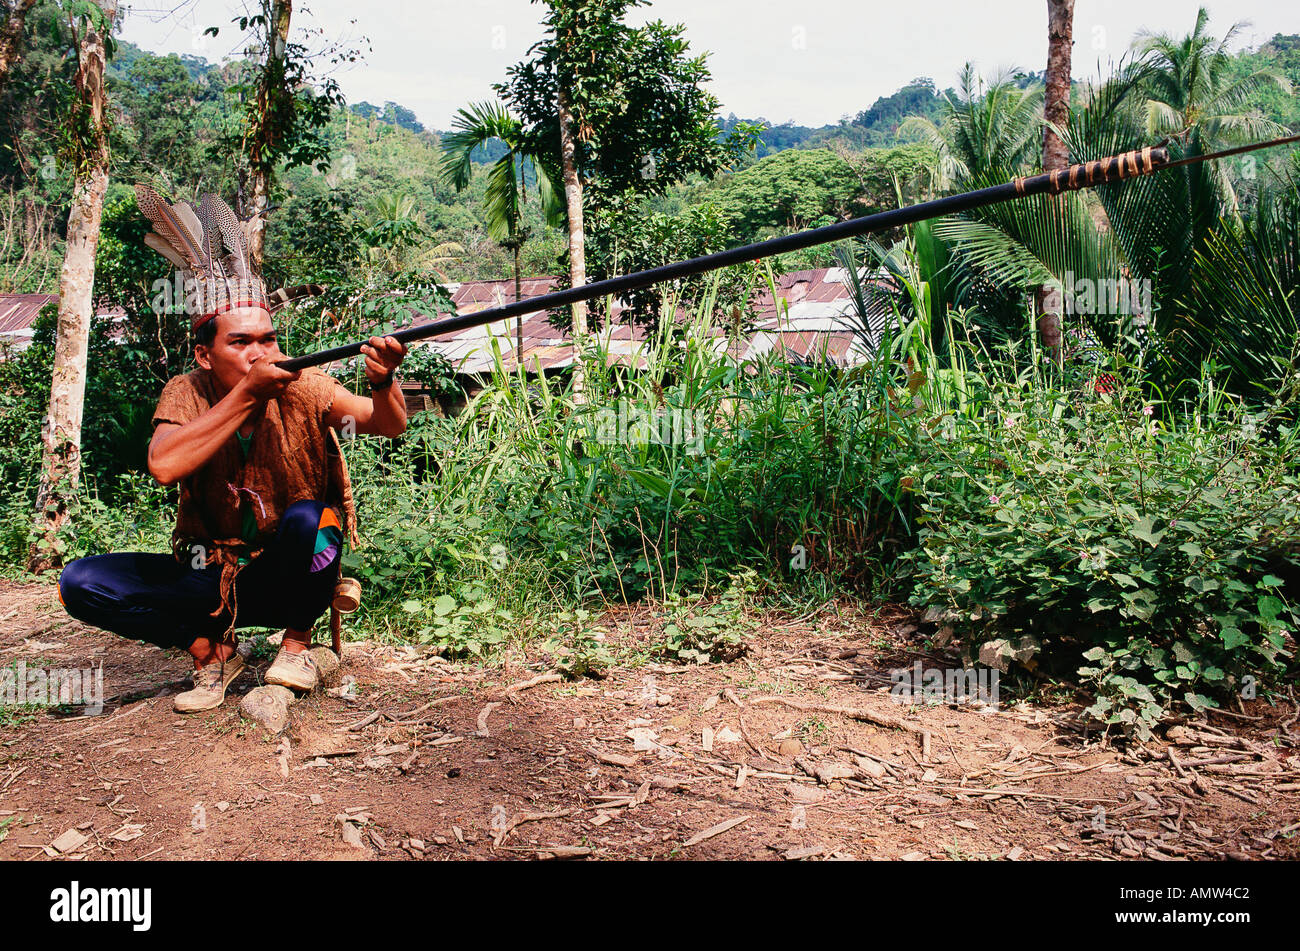 An Iban tribesman demonstrates the use of a blowpipe, at Engkari village, in Sarawak, Borneo, Malaysia. Stock Photo